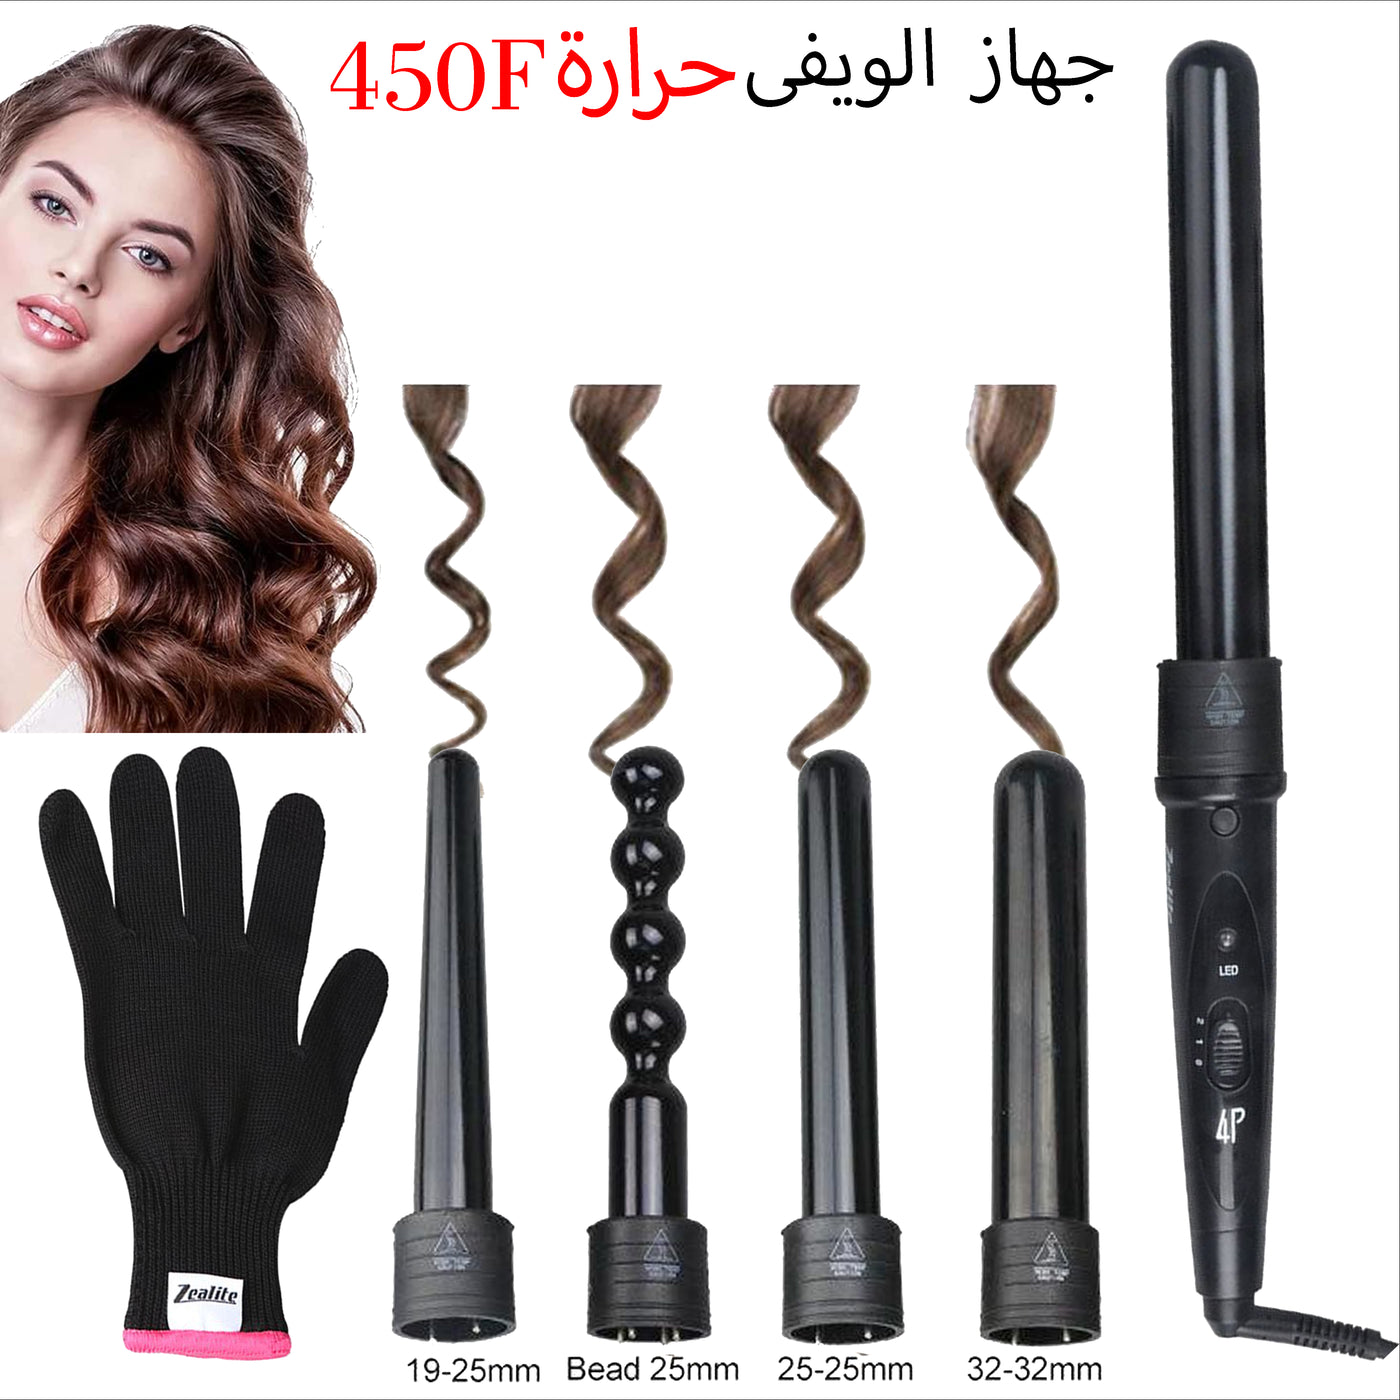 Ceramic 4 in 1 hair curler 450F With Free Glove